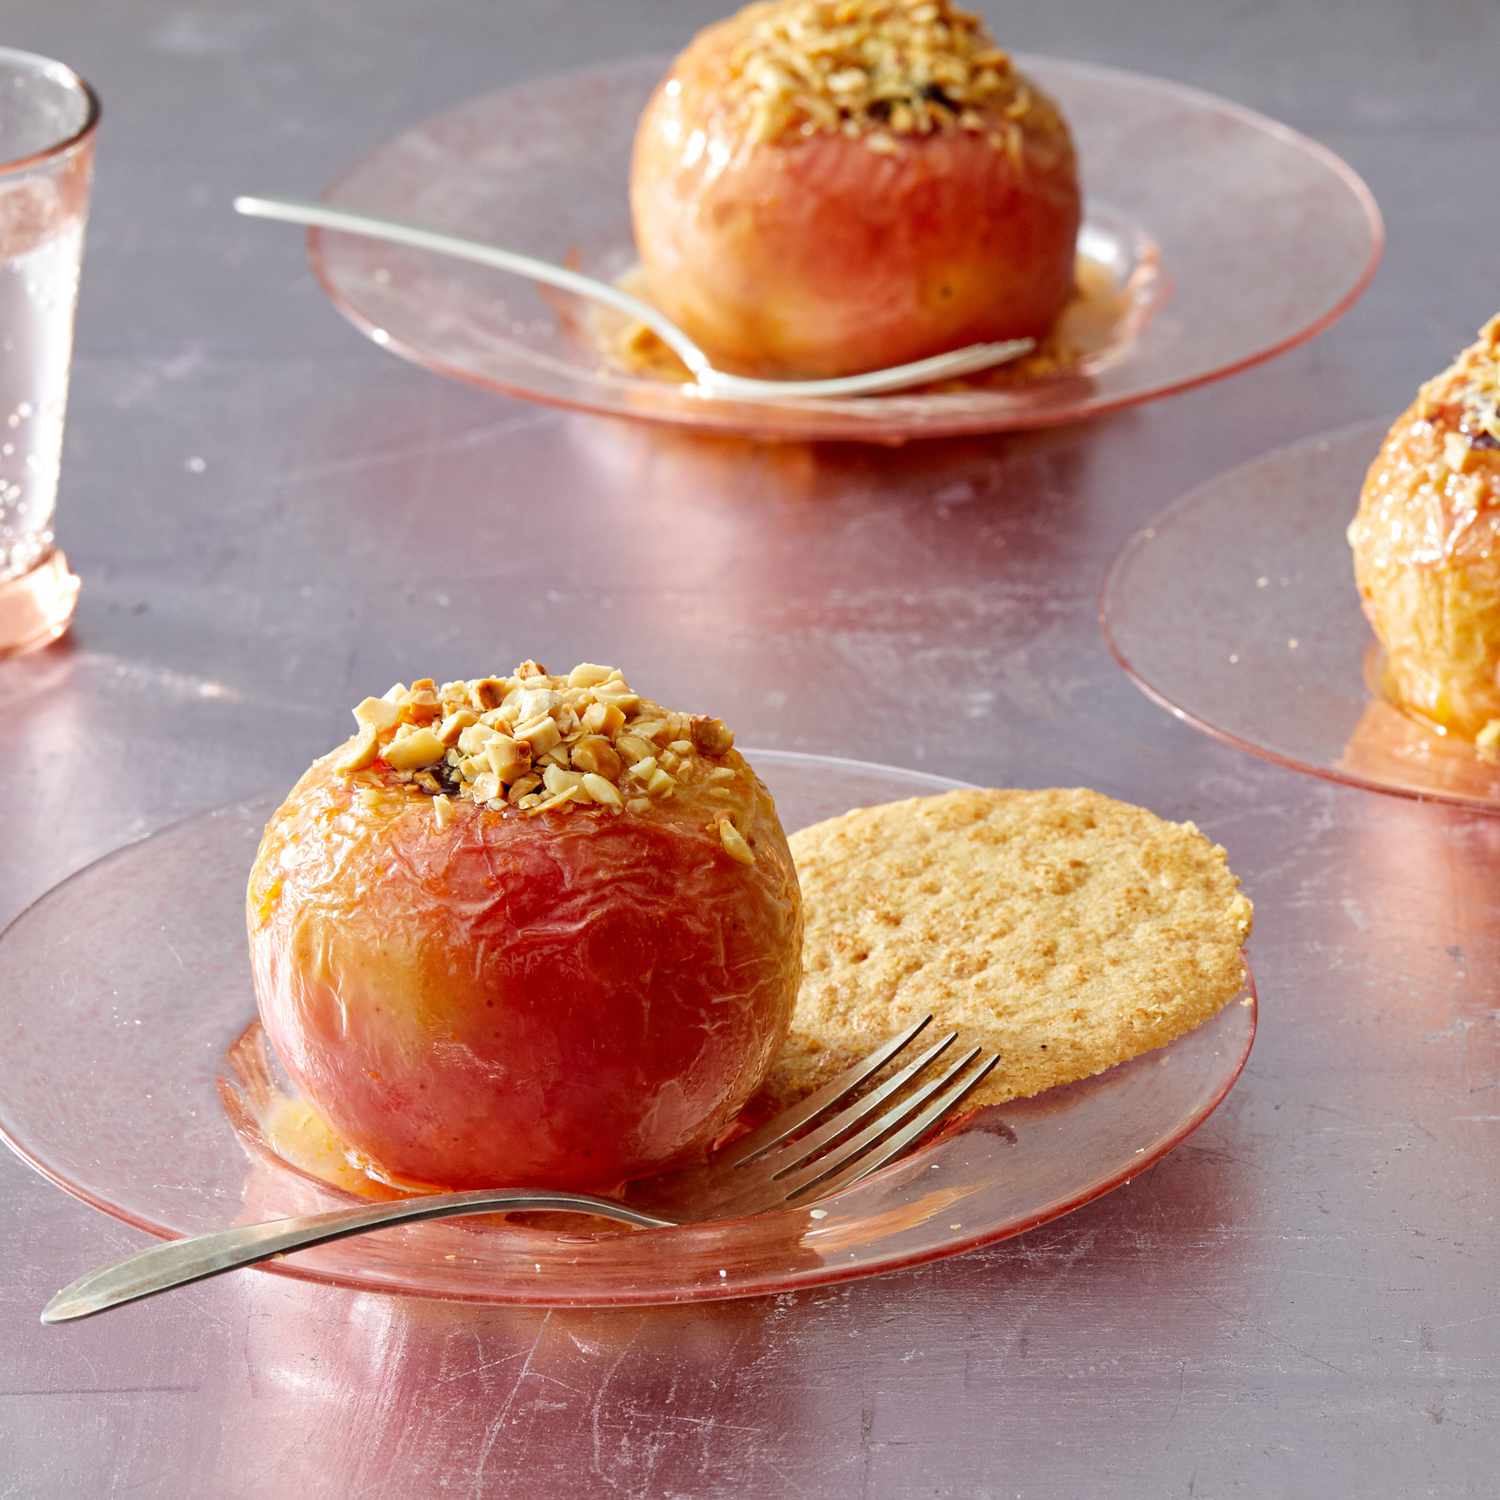 baked apples with cookie on plate